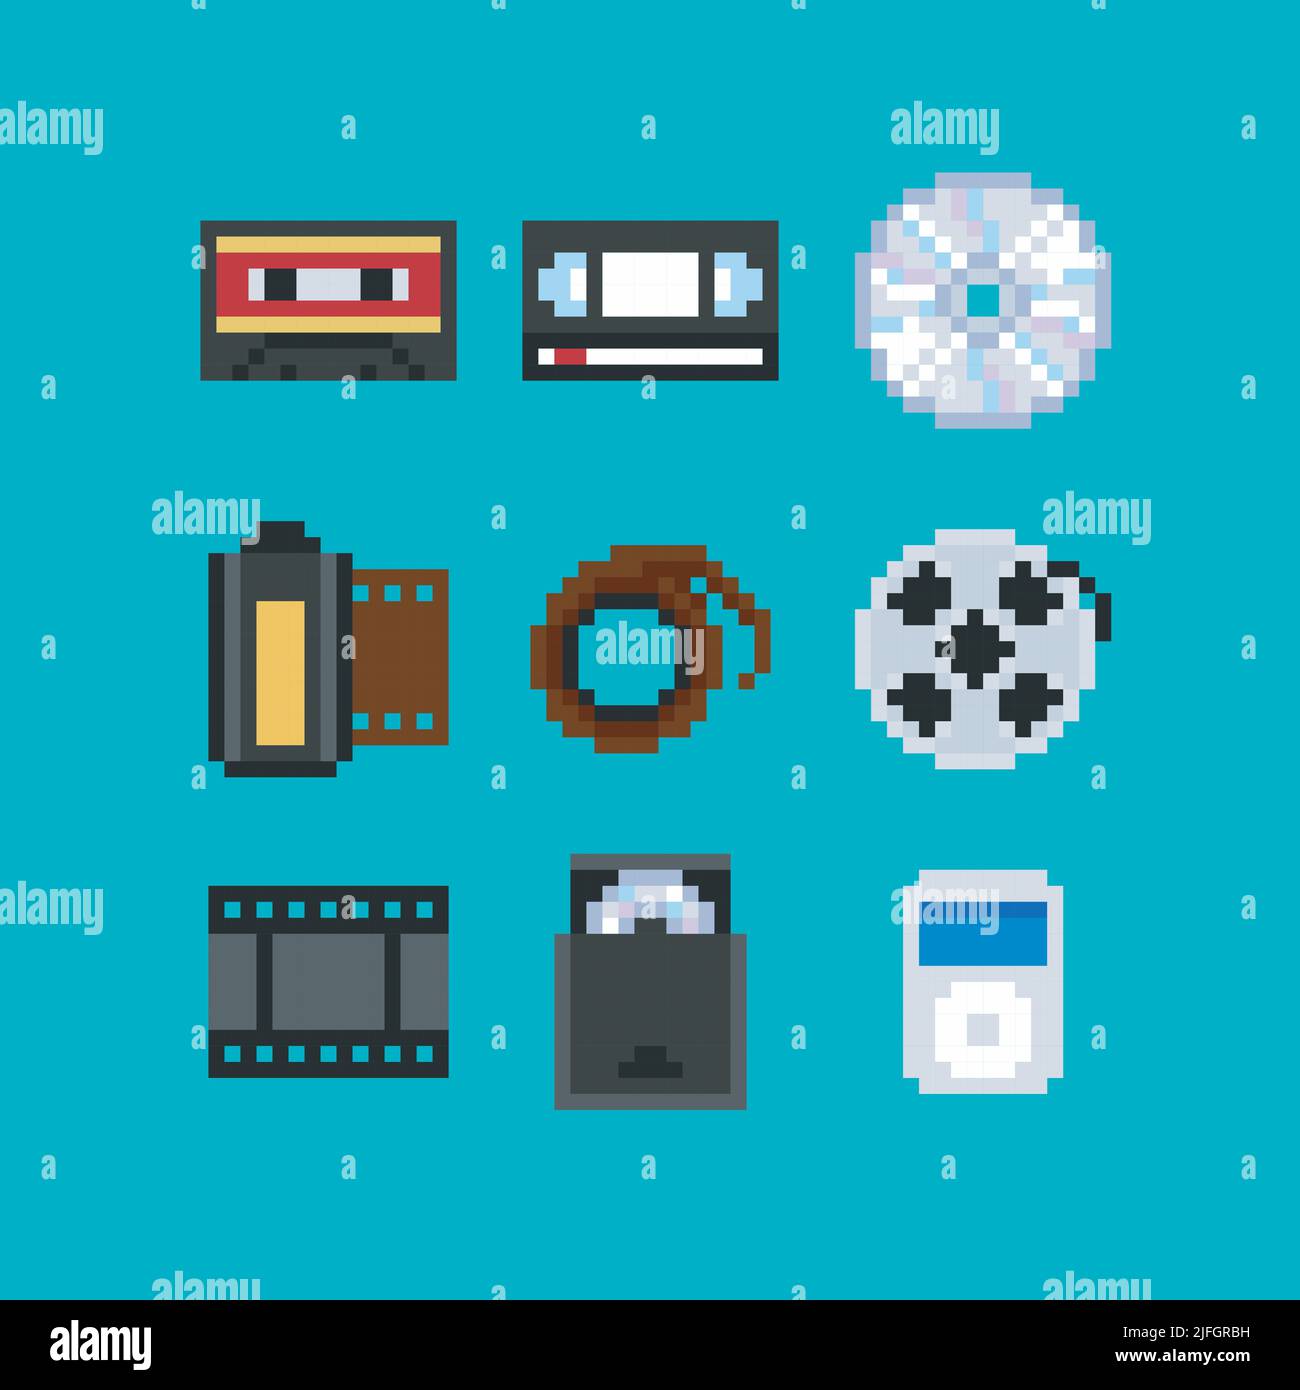 Pixel art vector illustration set - audio compact cassette, video tape cassette, matnetic tape, compact disc, audio and video media devices, digital Stock Vector